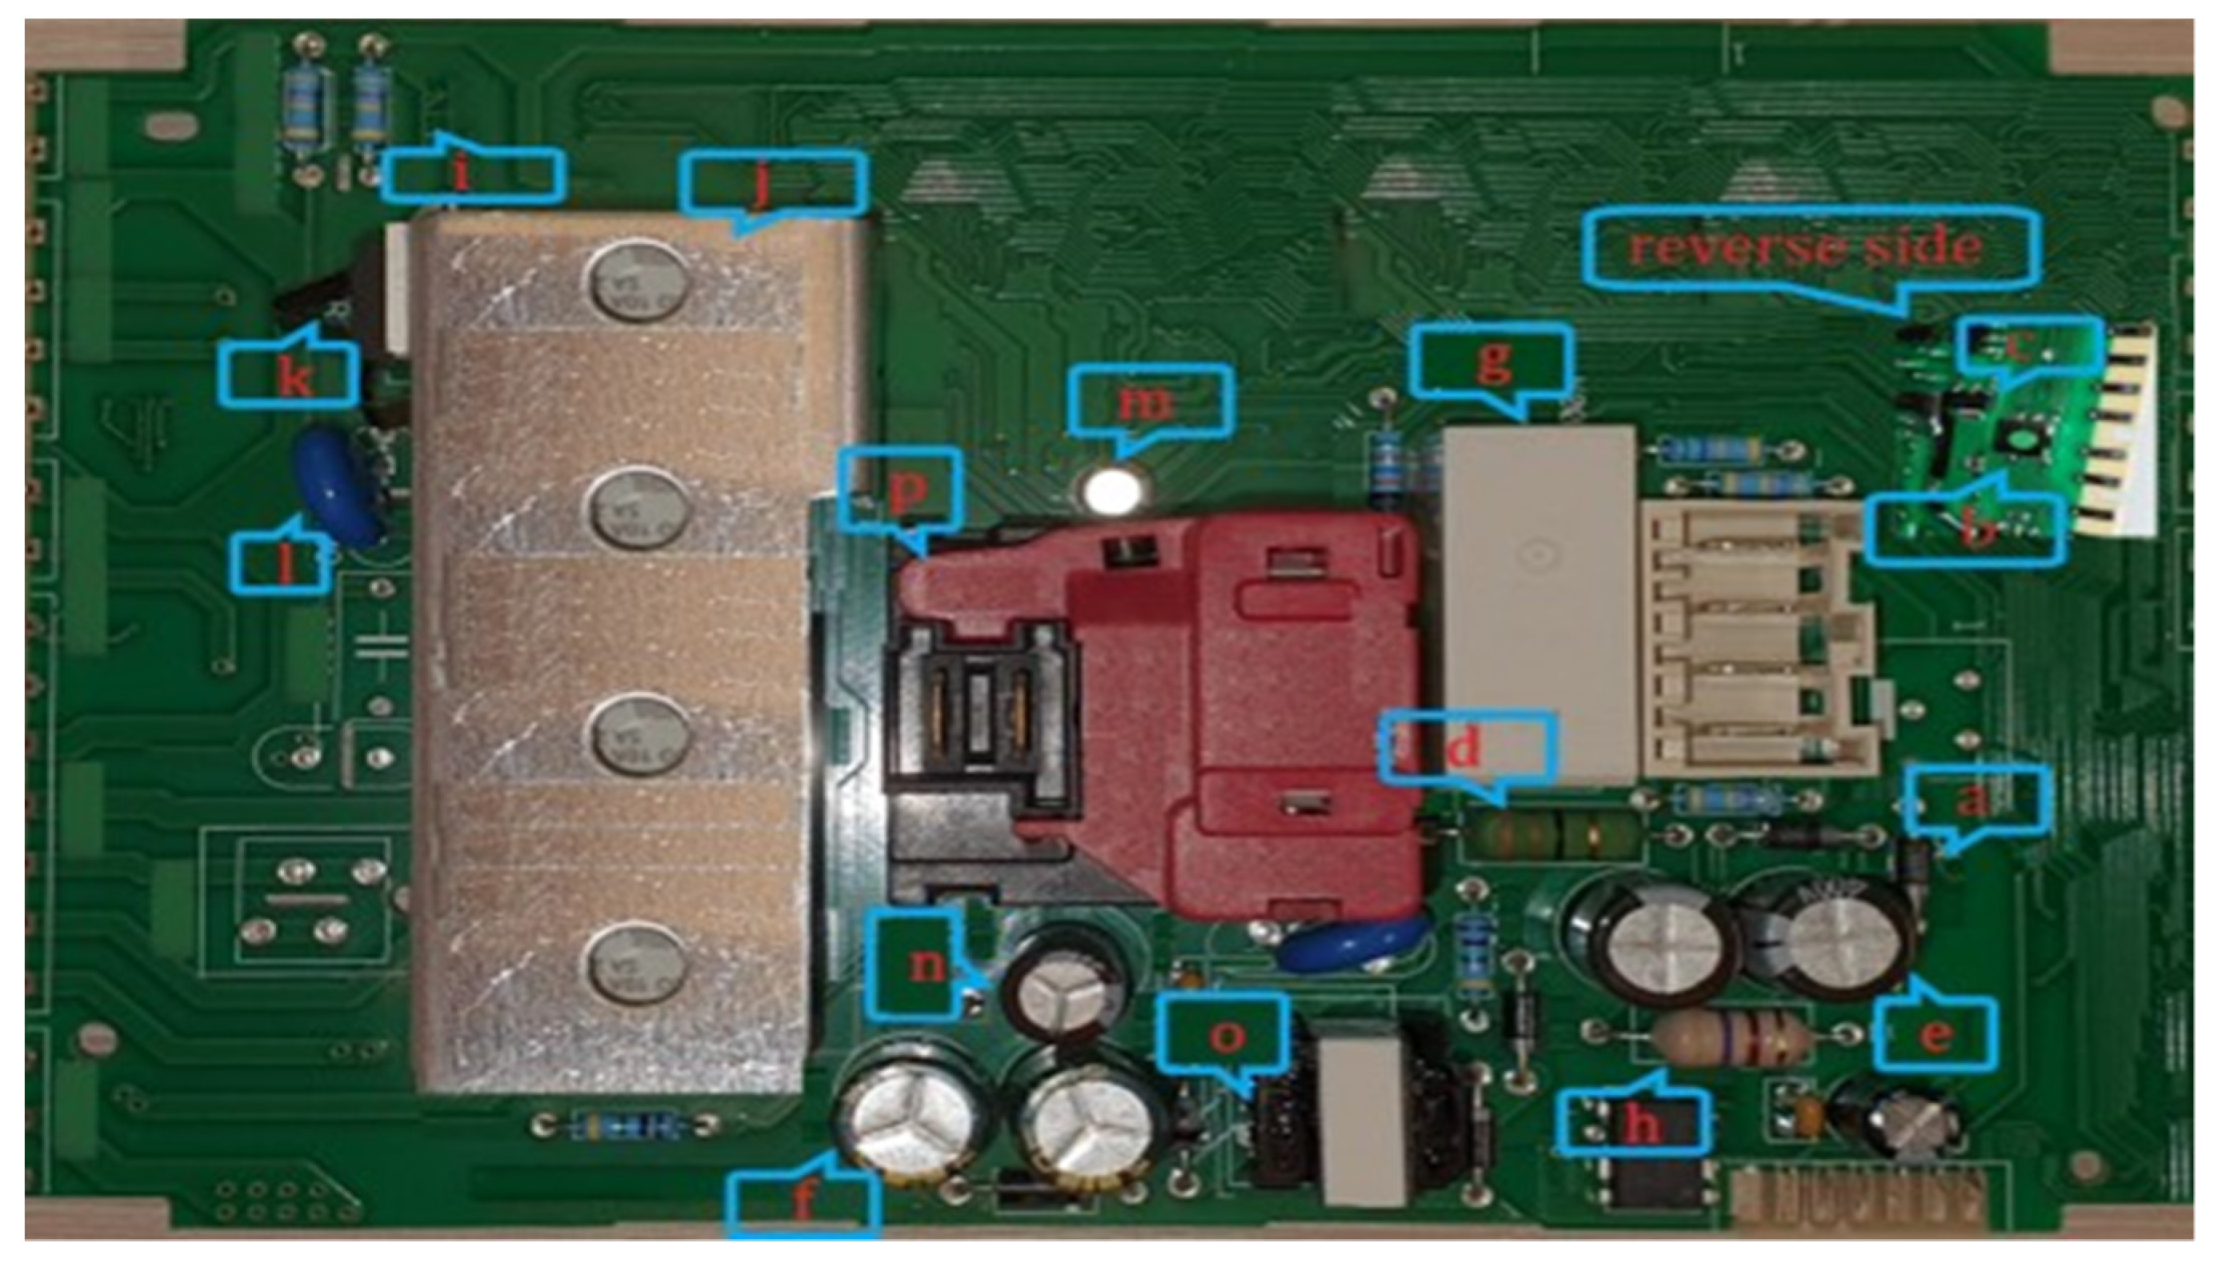 Energies | Free Full-Text | A Novel ILP Formulation for PCB Maintenance  Considering Electrical Measurements and Aging Factors: A &ldquo;Right to  Repair&rdquo; Approach | HTML